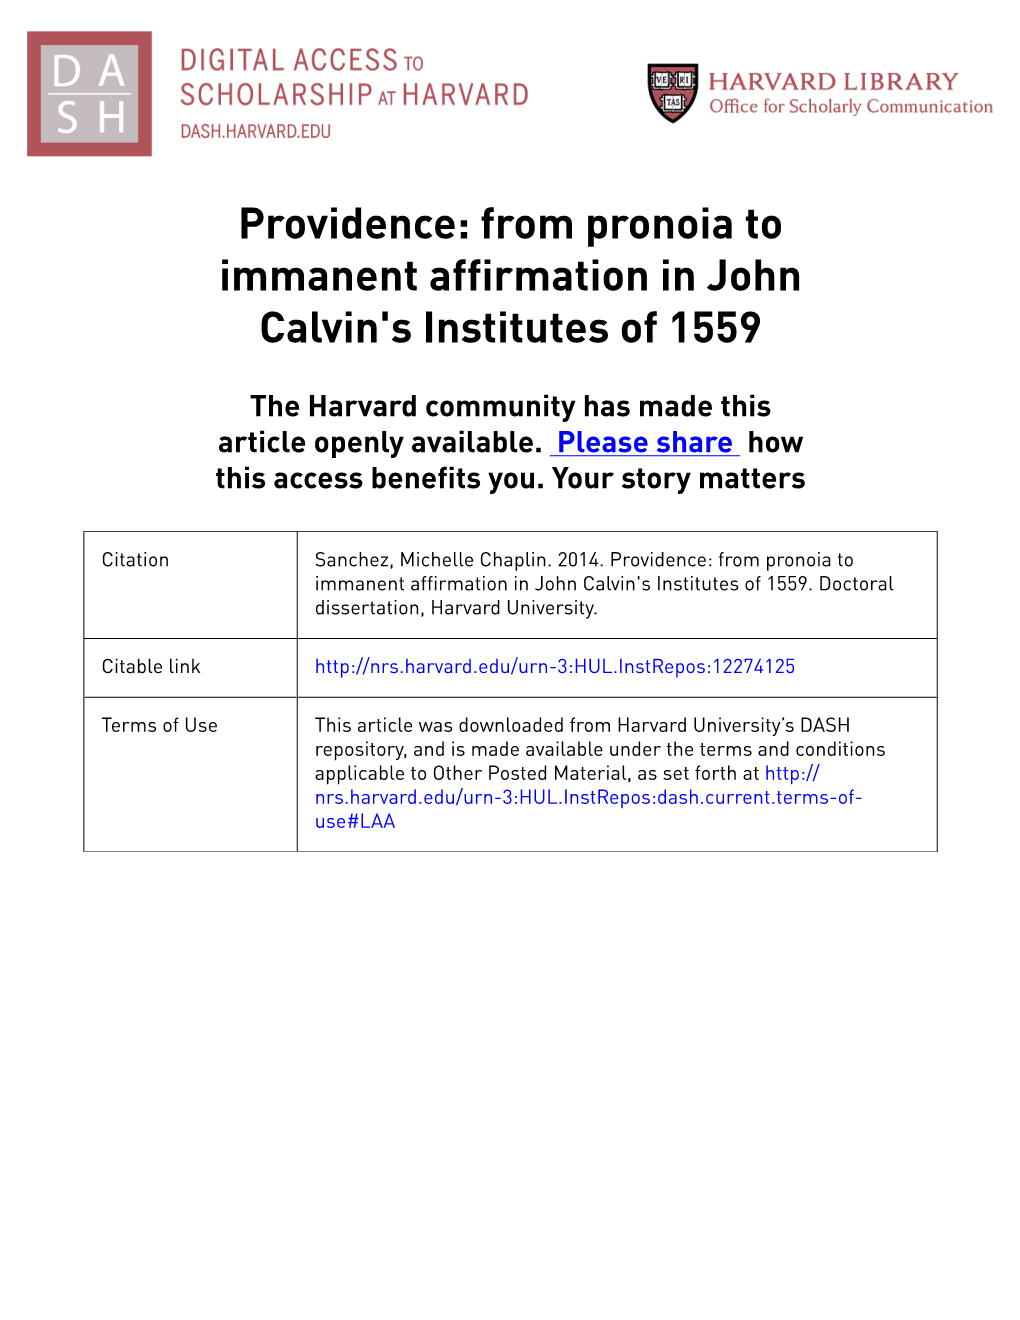 Providence: from Pronoia to Immanent Affirmation in John Calvin's Institutes of 1559